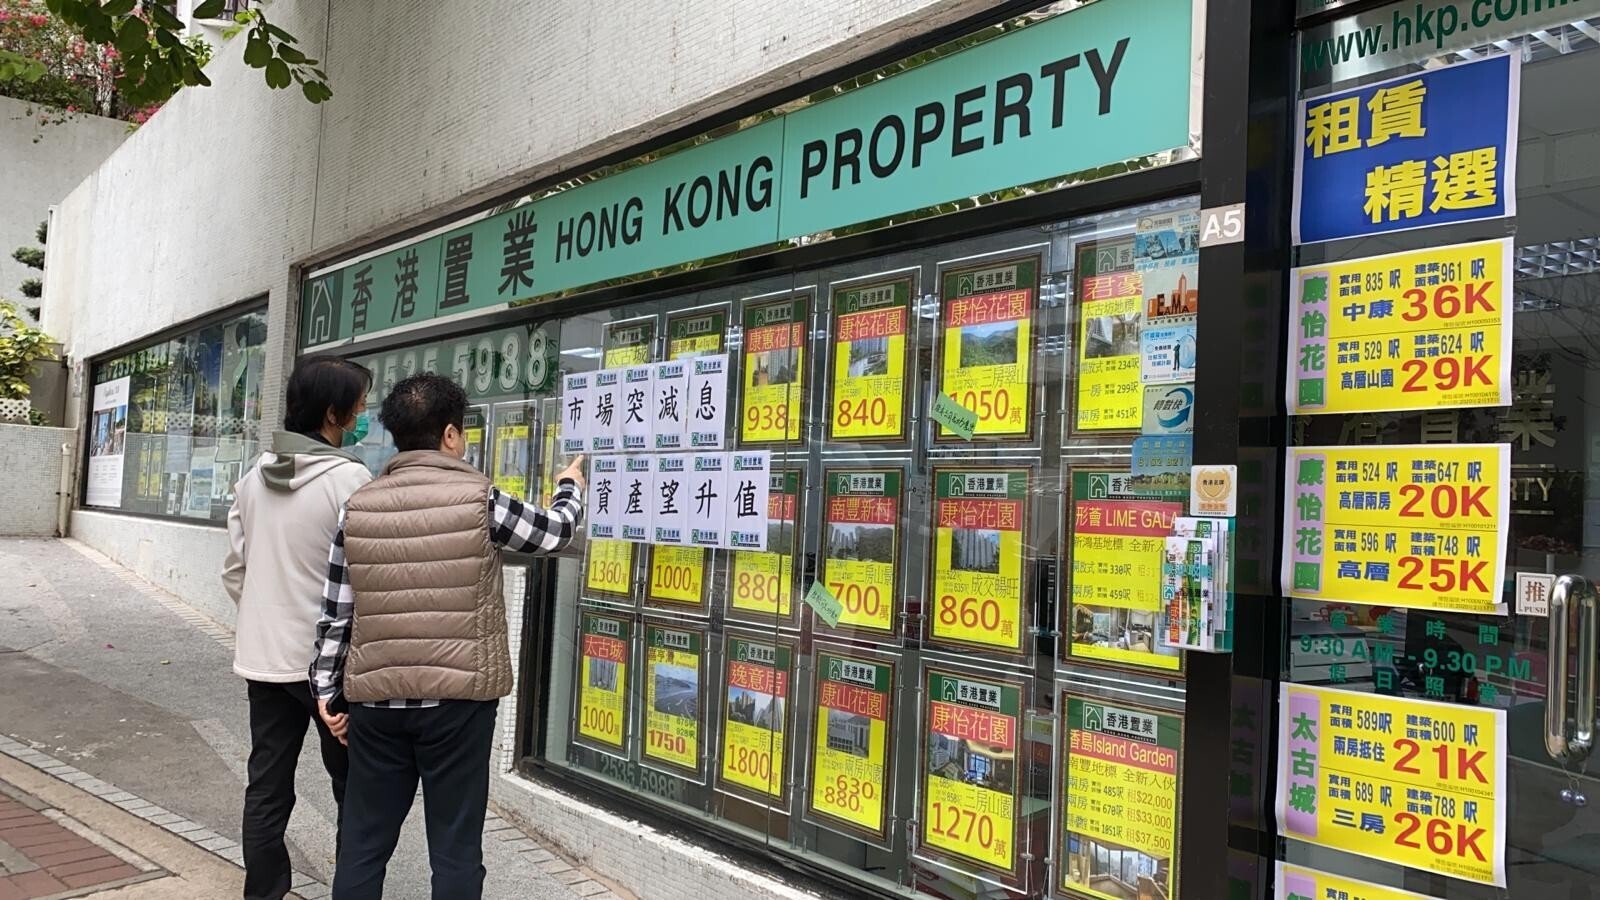 Bills stuck on a property agent’s office on March 4, 2020, says buyers should take advantage of the Federal Reserve’s rate cut as it will boost Hong Kong’s housing market. Photo: Handout